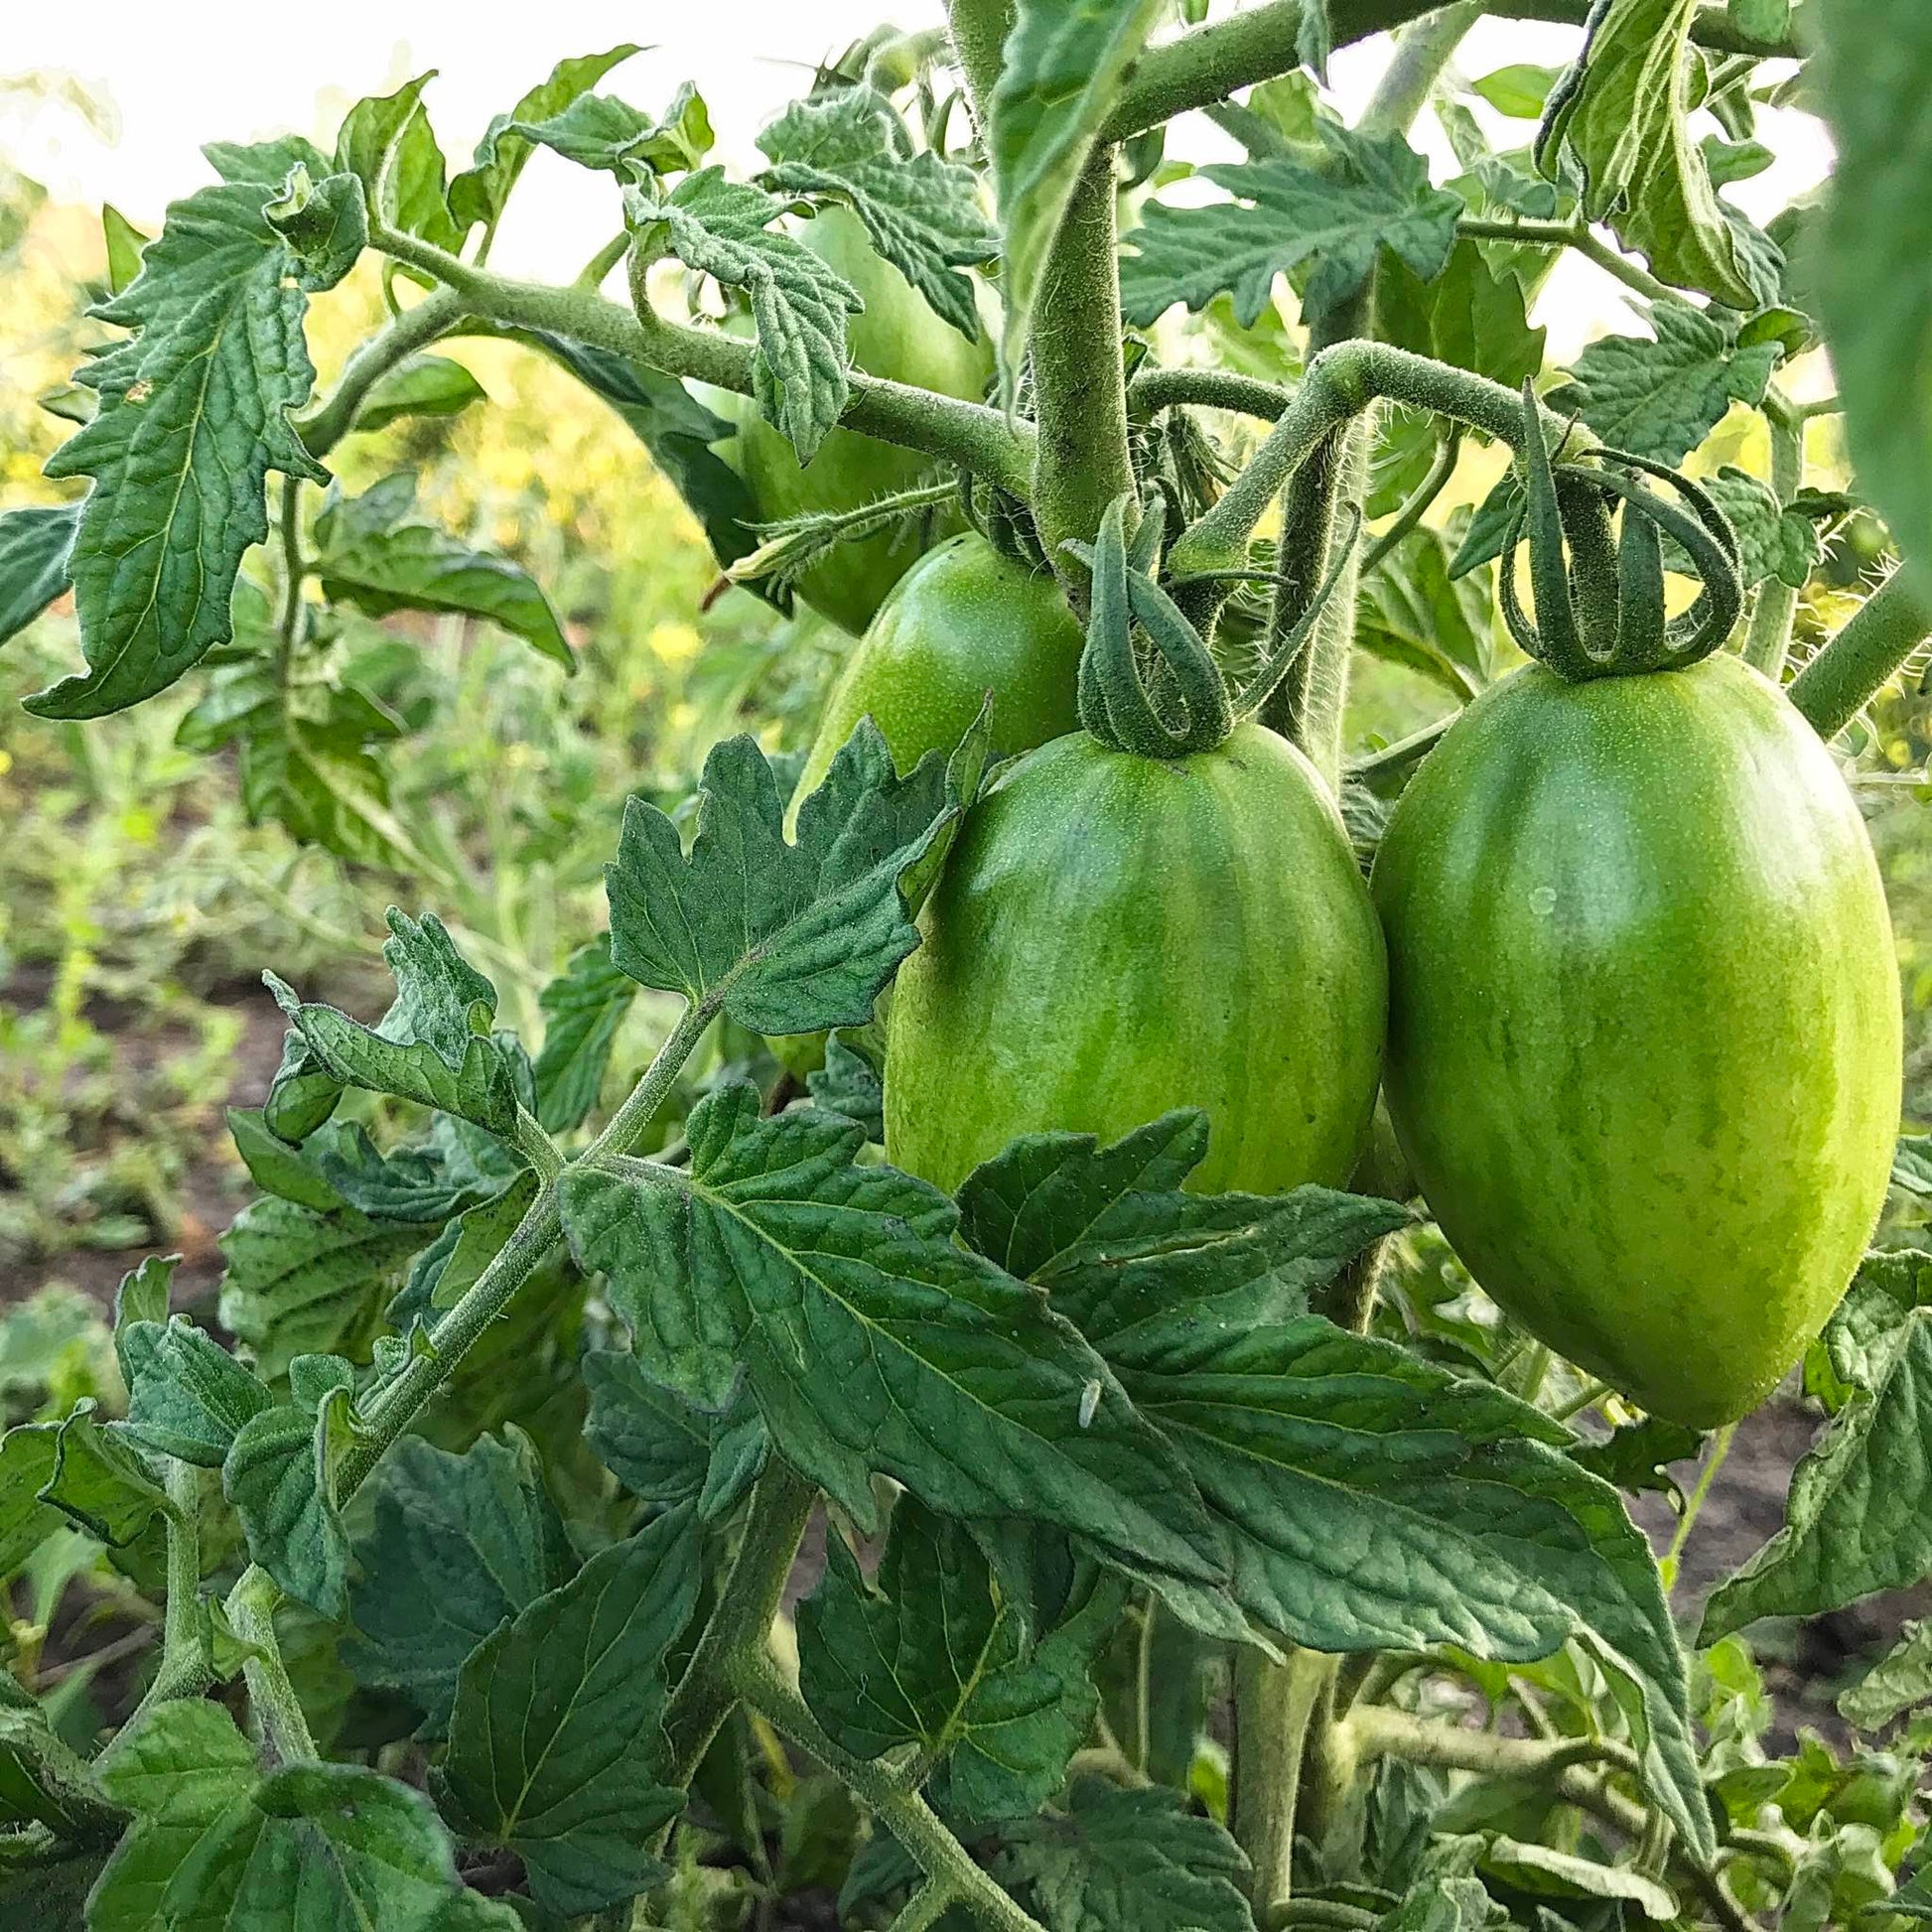 Unripe green skinned roma tomatoes on a dwarf tomato plant.